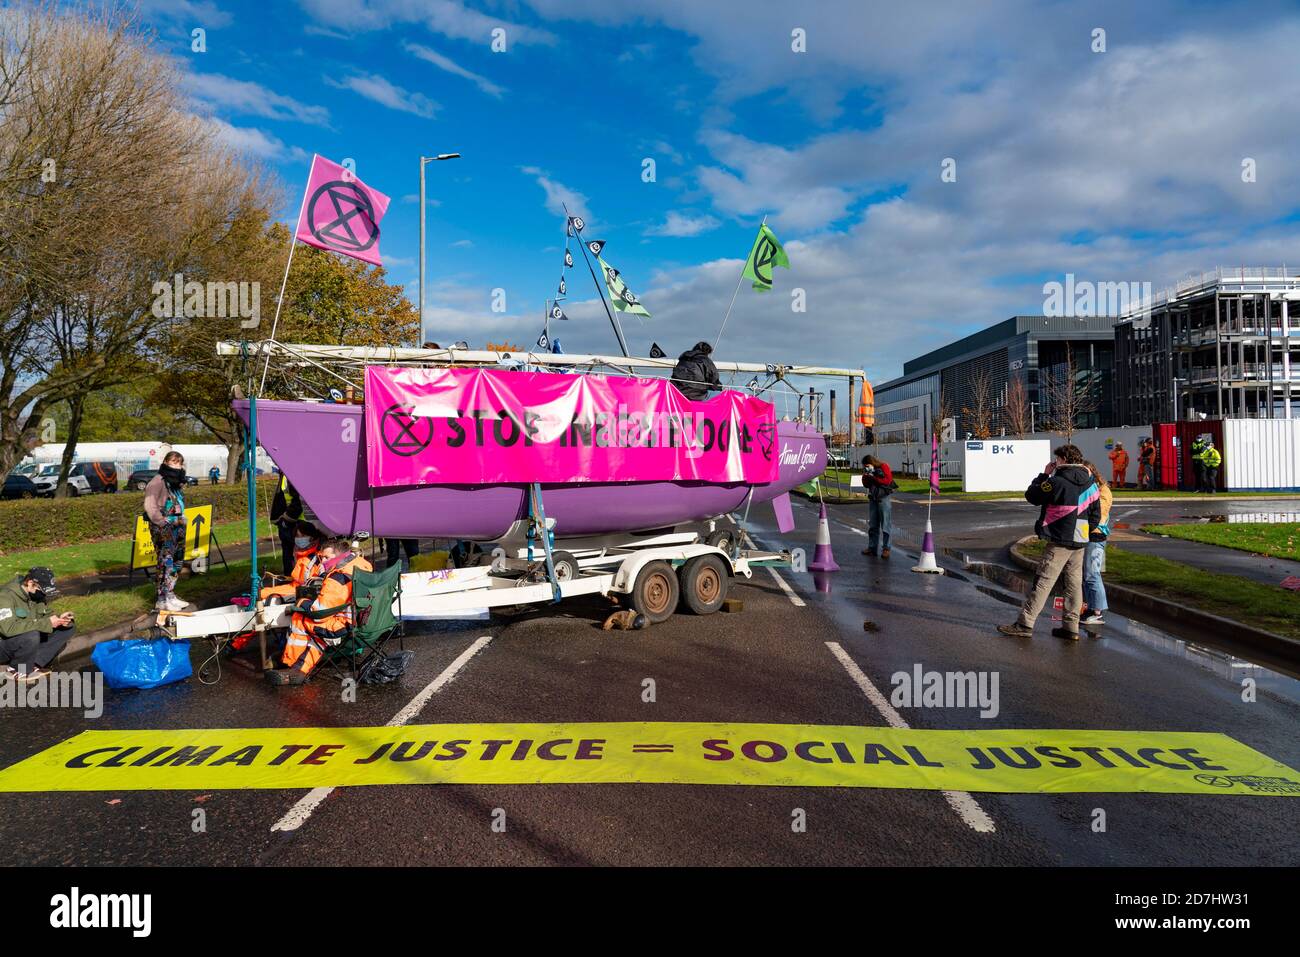 Grangemouth, Scotland, UK. 23 October 2020. Extinction Rebellion climate change protesters block entrance to INEOS headquarters at Grangemouth. Protesters have locked themselves together with chain and have parked a yacht in the road blocking access. Police have closed Inchyra Road. Iain Masterton/Alamy Live News Stock Photo